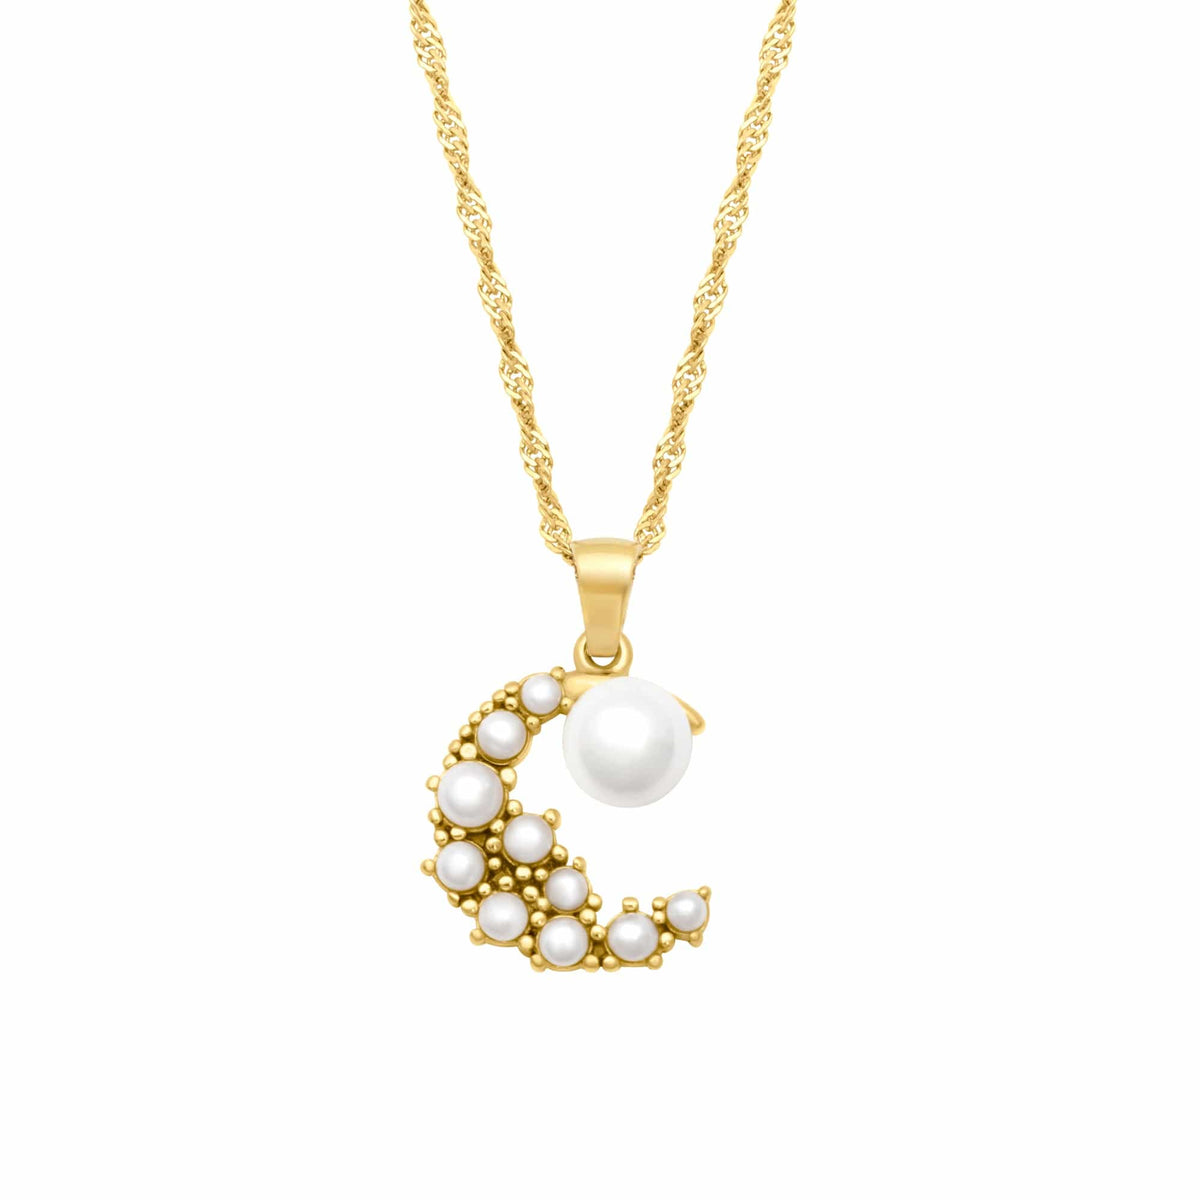 BohoMoon Stainless Steel Pearl Moon Necklace Gold